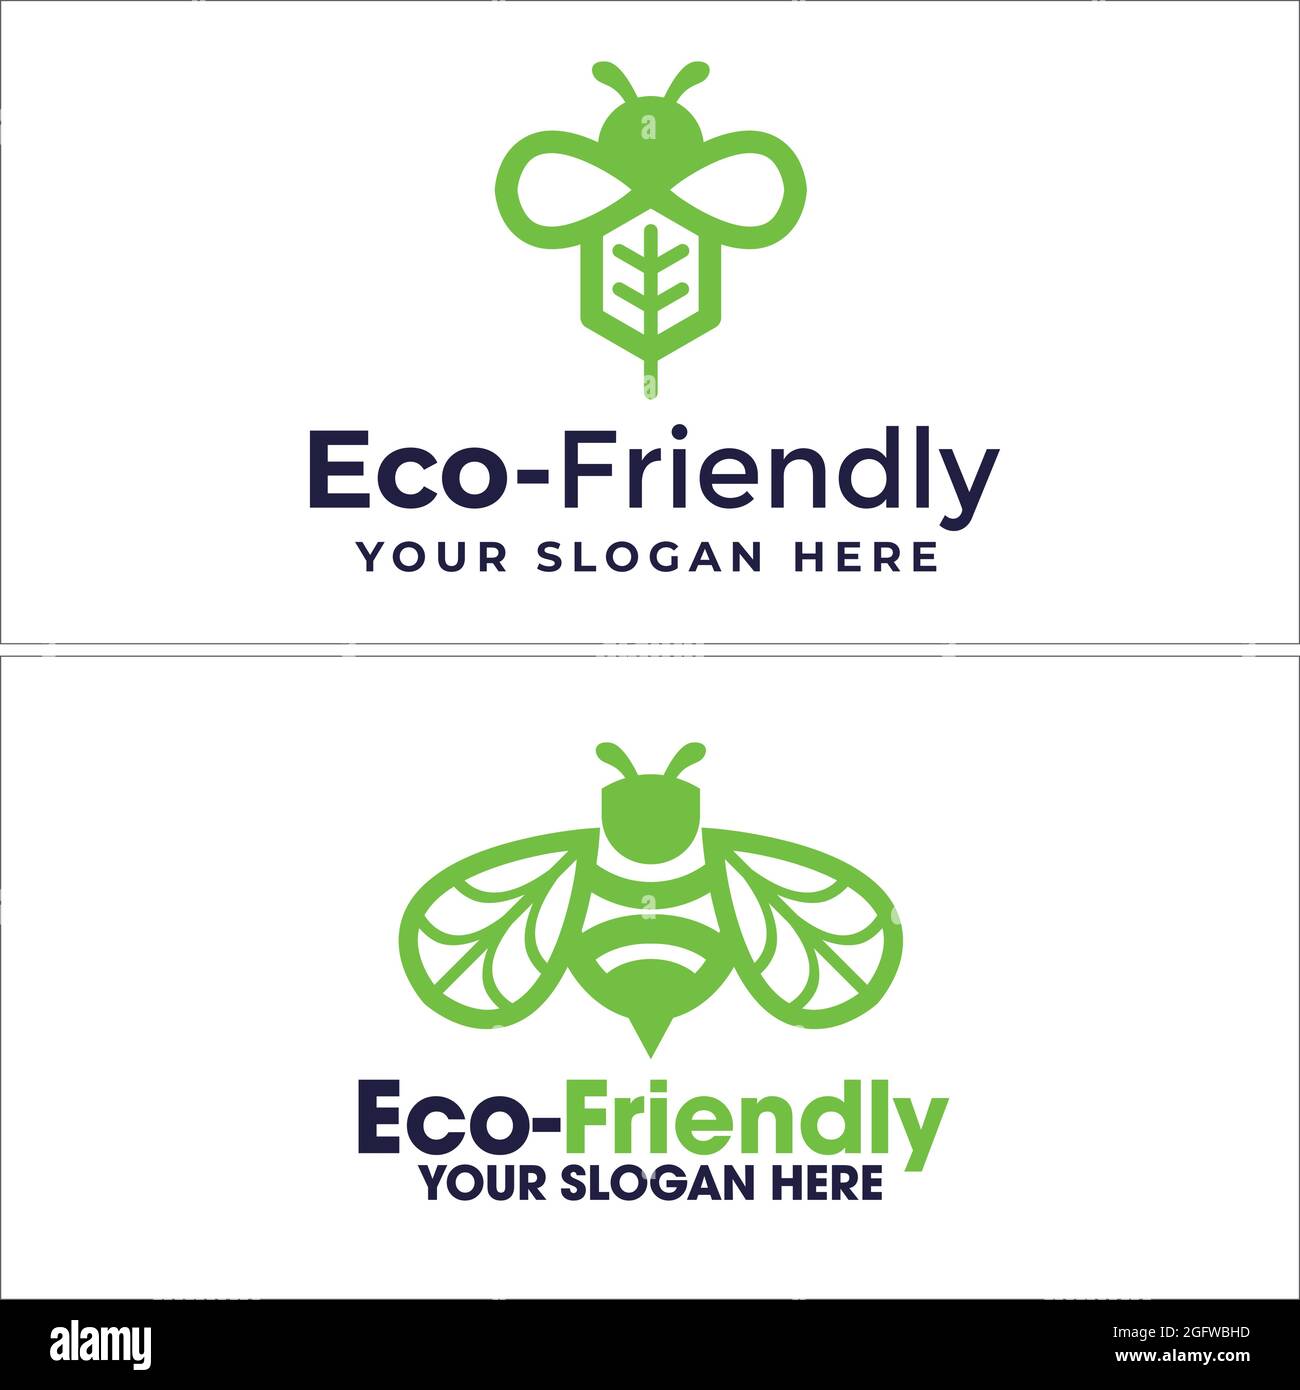 Eco friendly logo with green bee leaves vector design Stock Vector